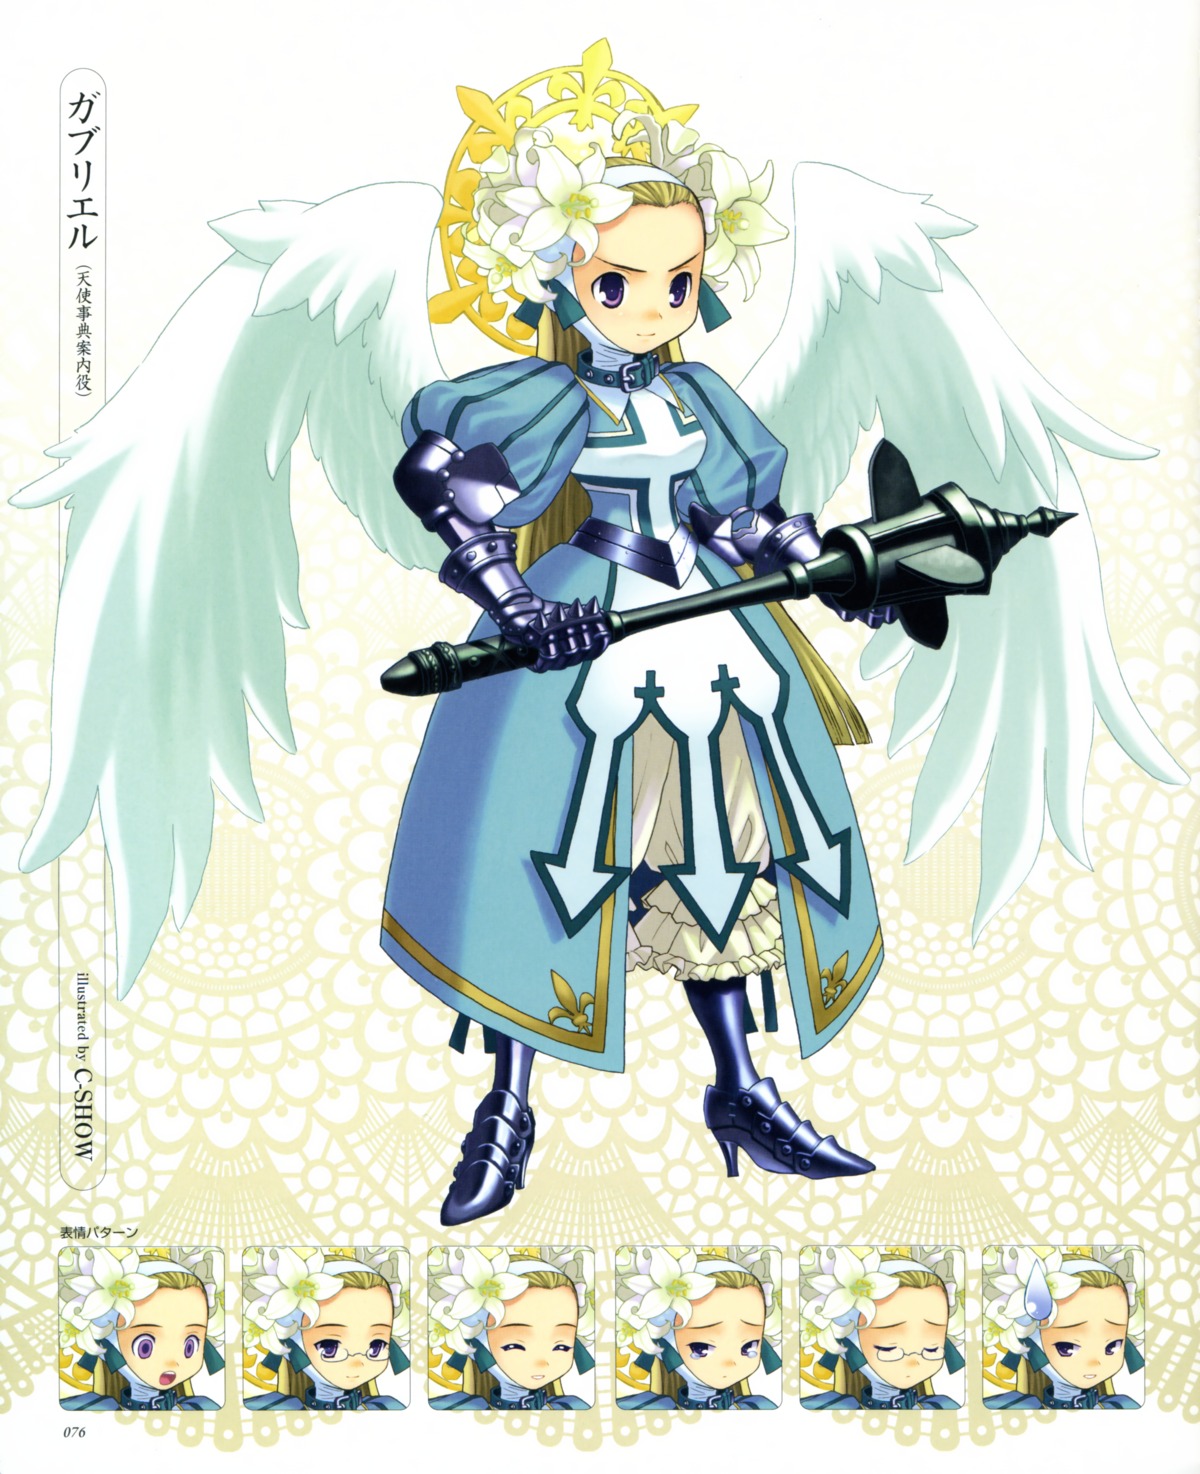 angel armor c-show expression heels weapon wings